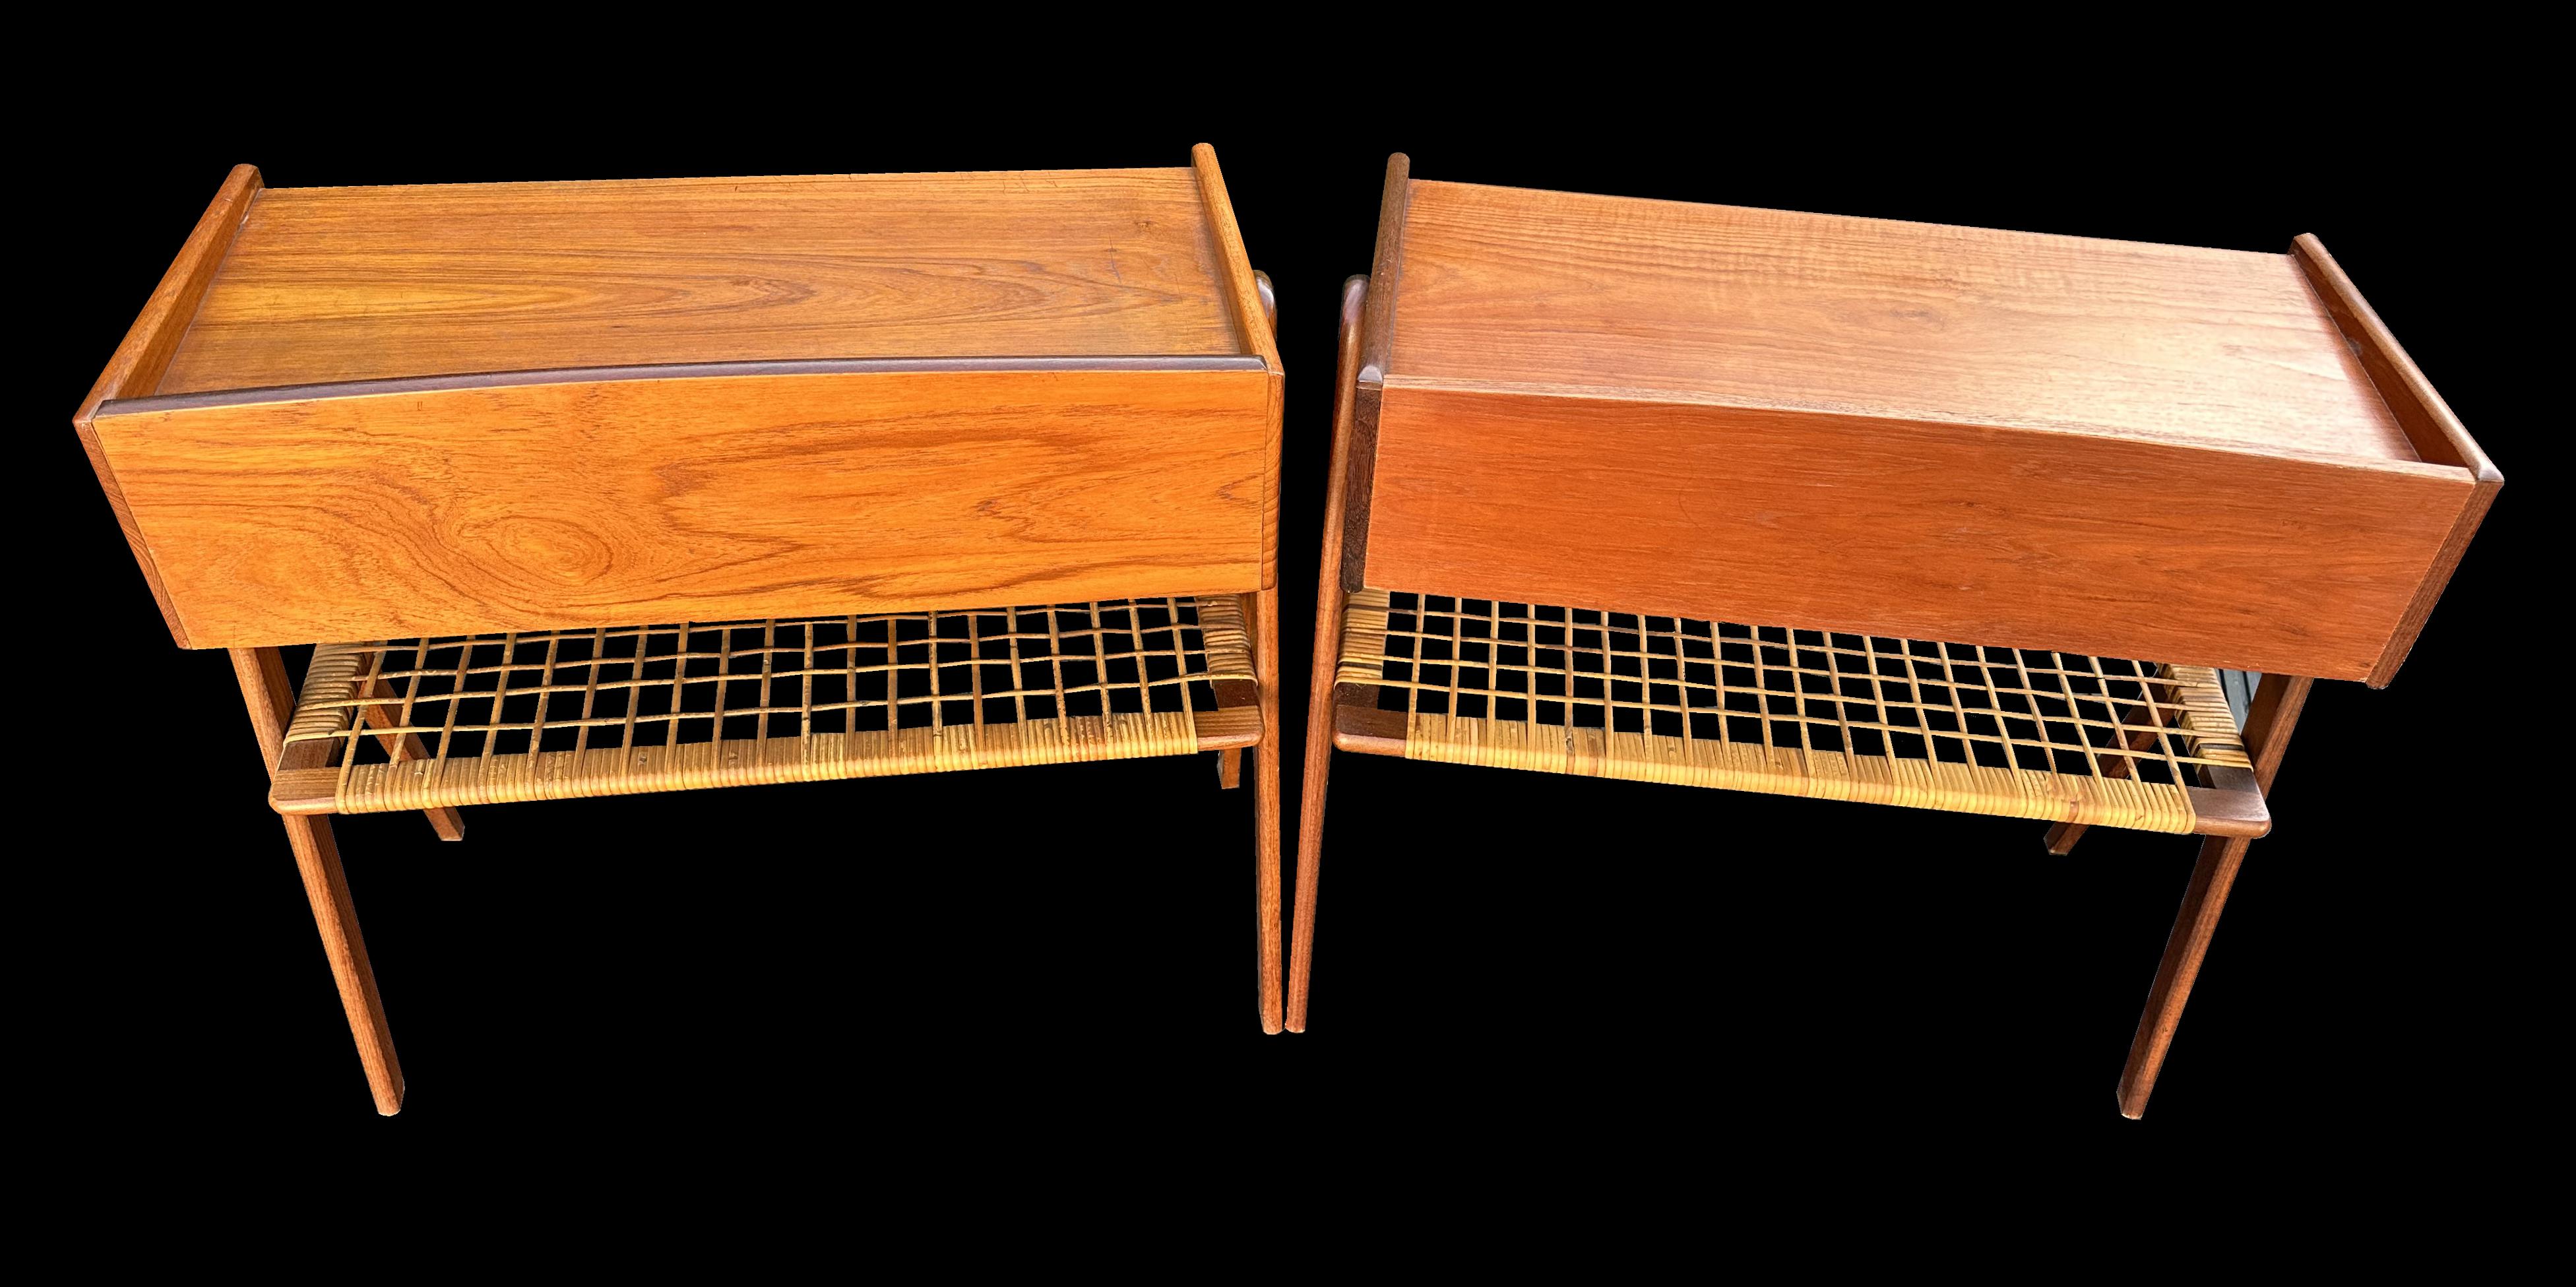 A lovely original pair of bedsides in good original condition, nice patina on both the Teak and Rattan.